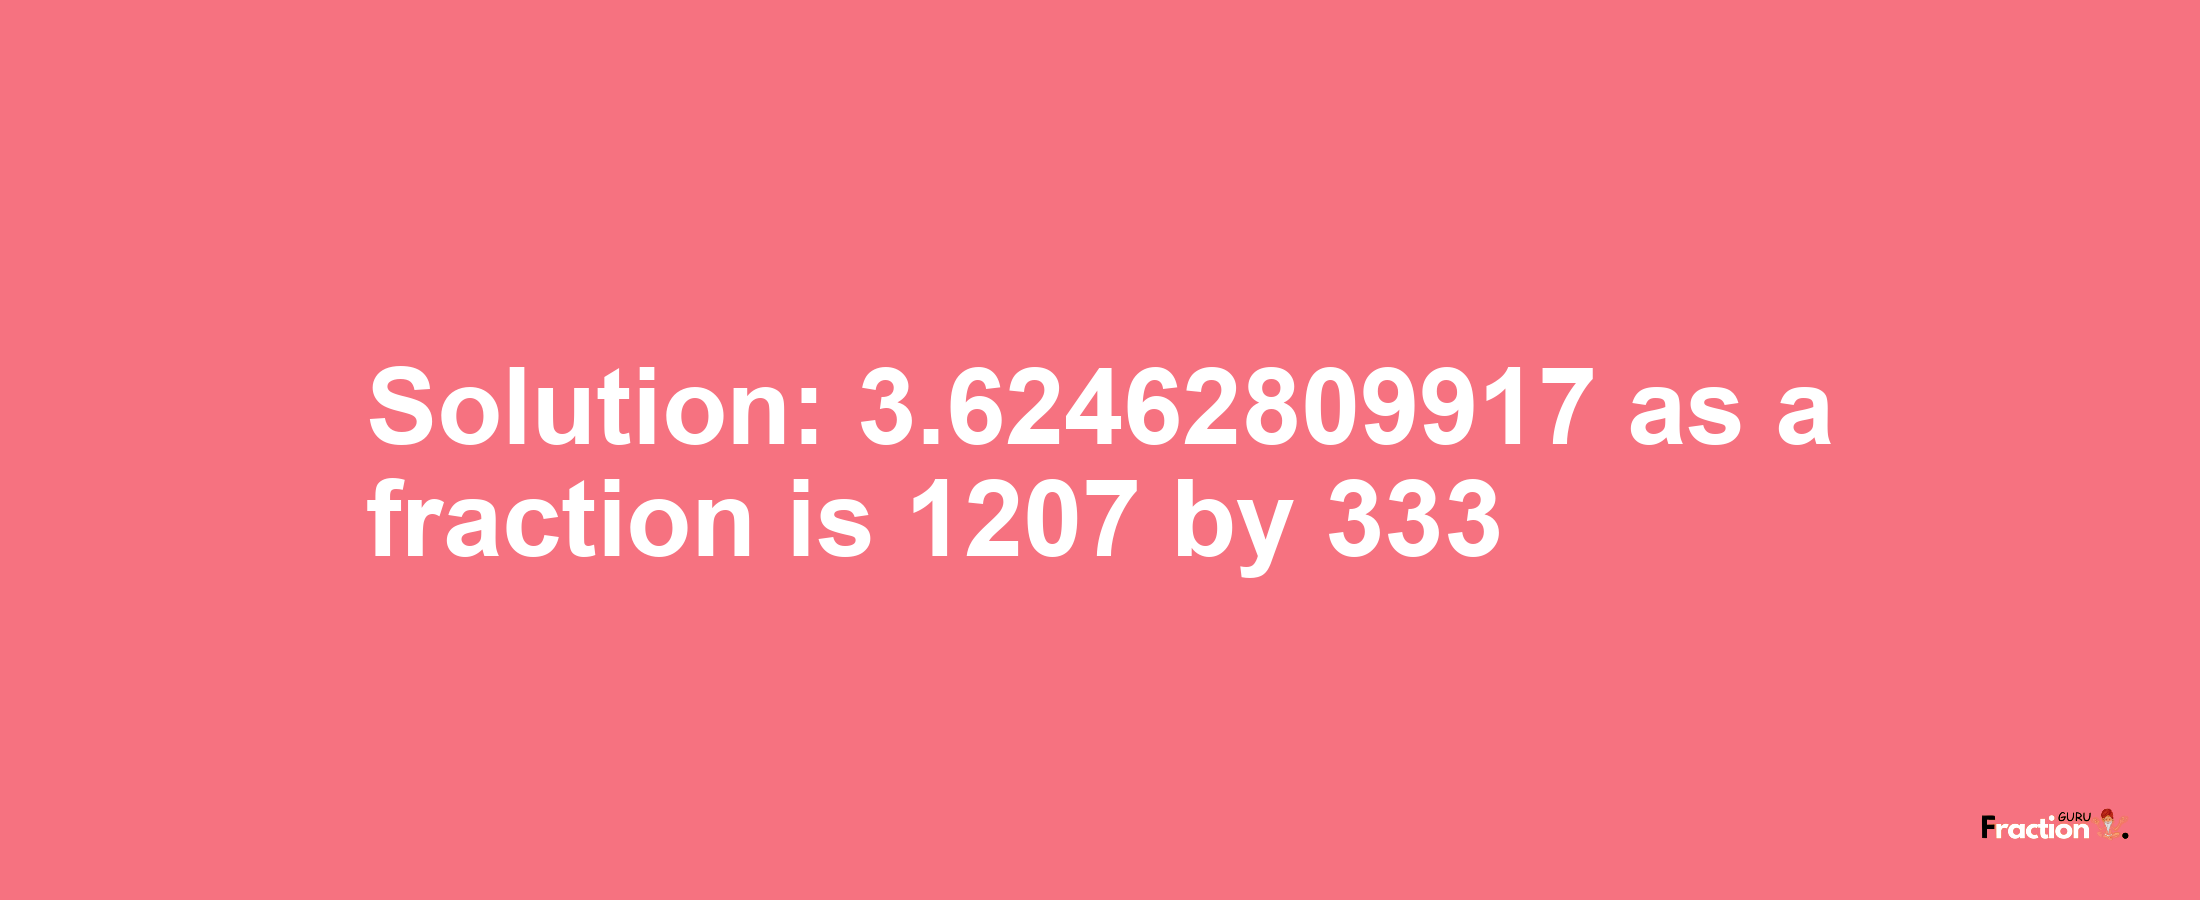 Solution:3.62462809917 as a fraction is 1207/333